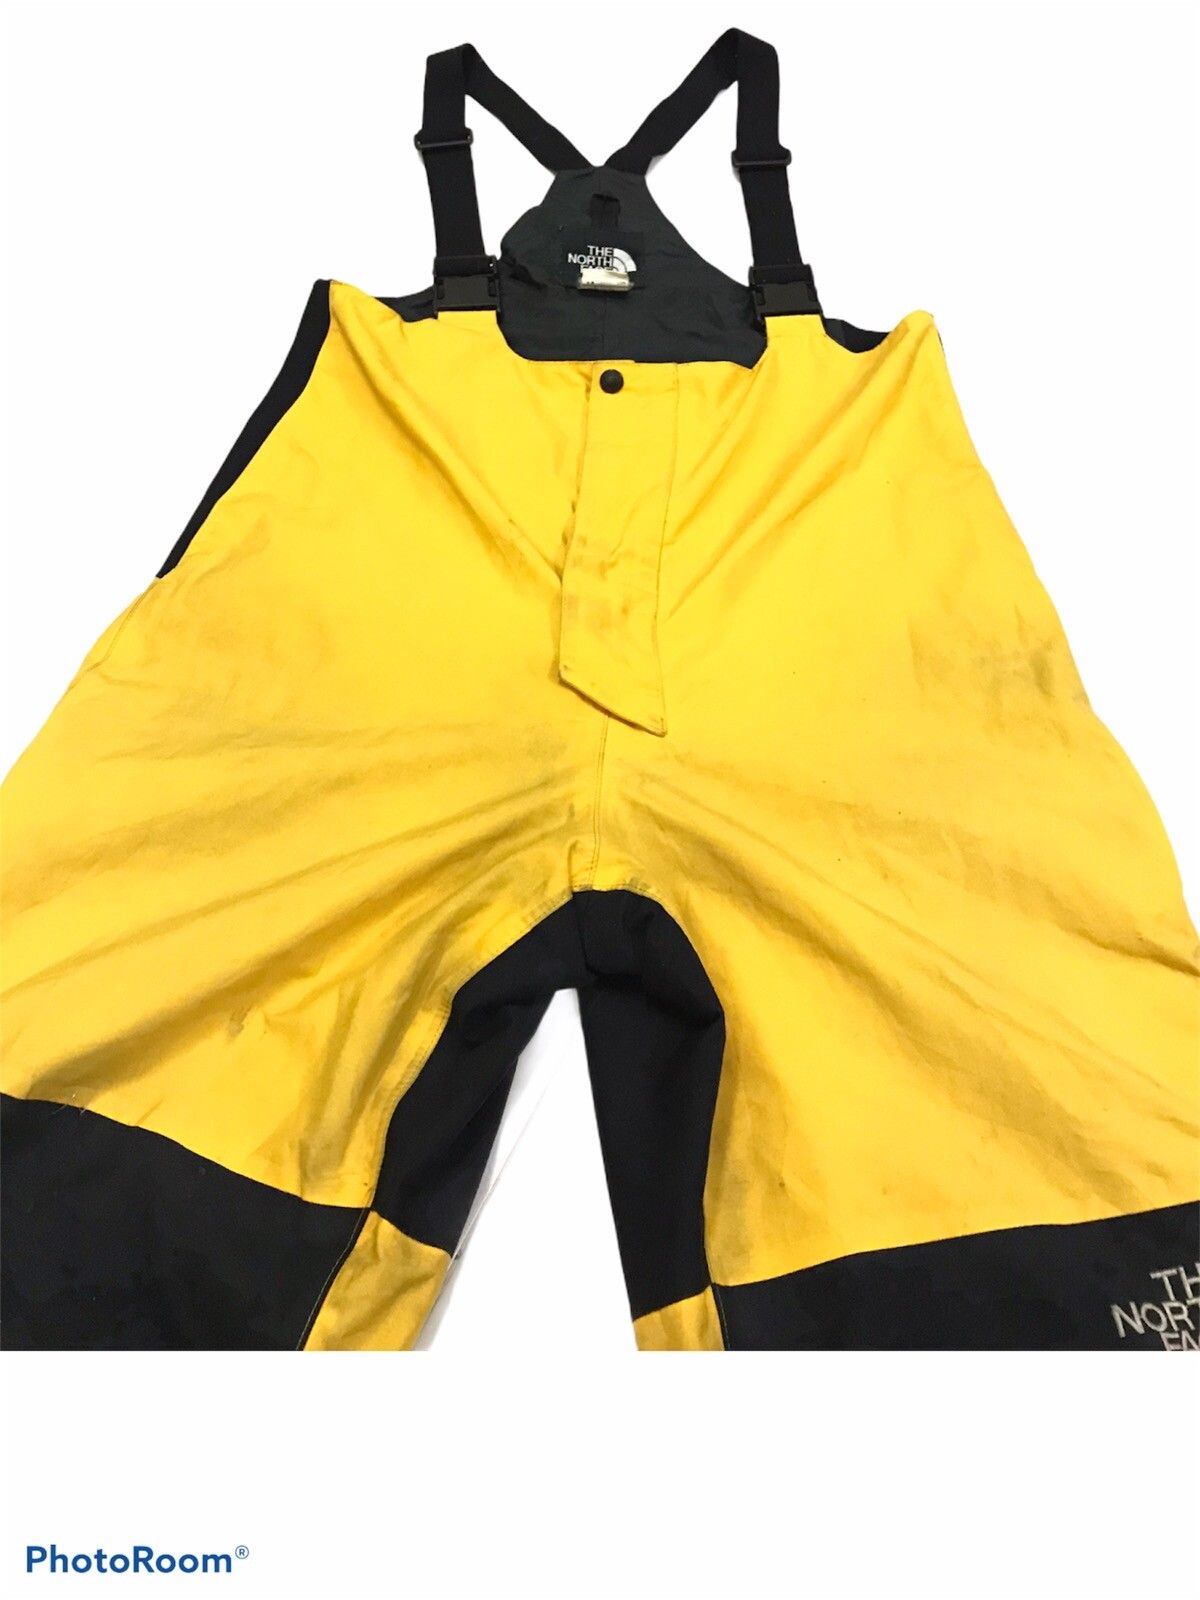 THE NORTH FACE” GORE-TEX SKI PANTS BIBS OVERALLS IN YELLOW - 3